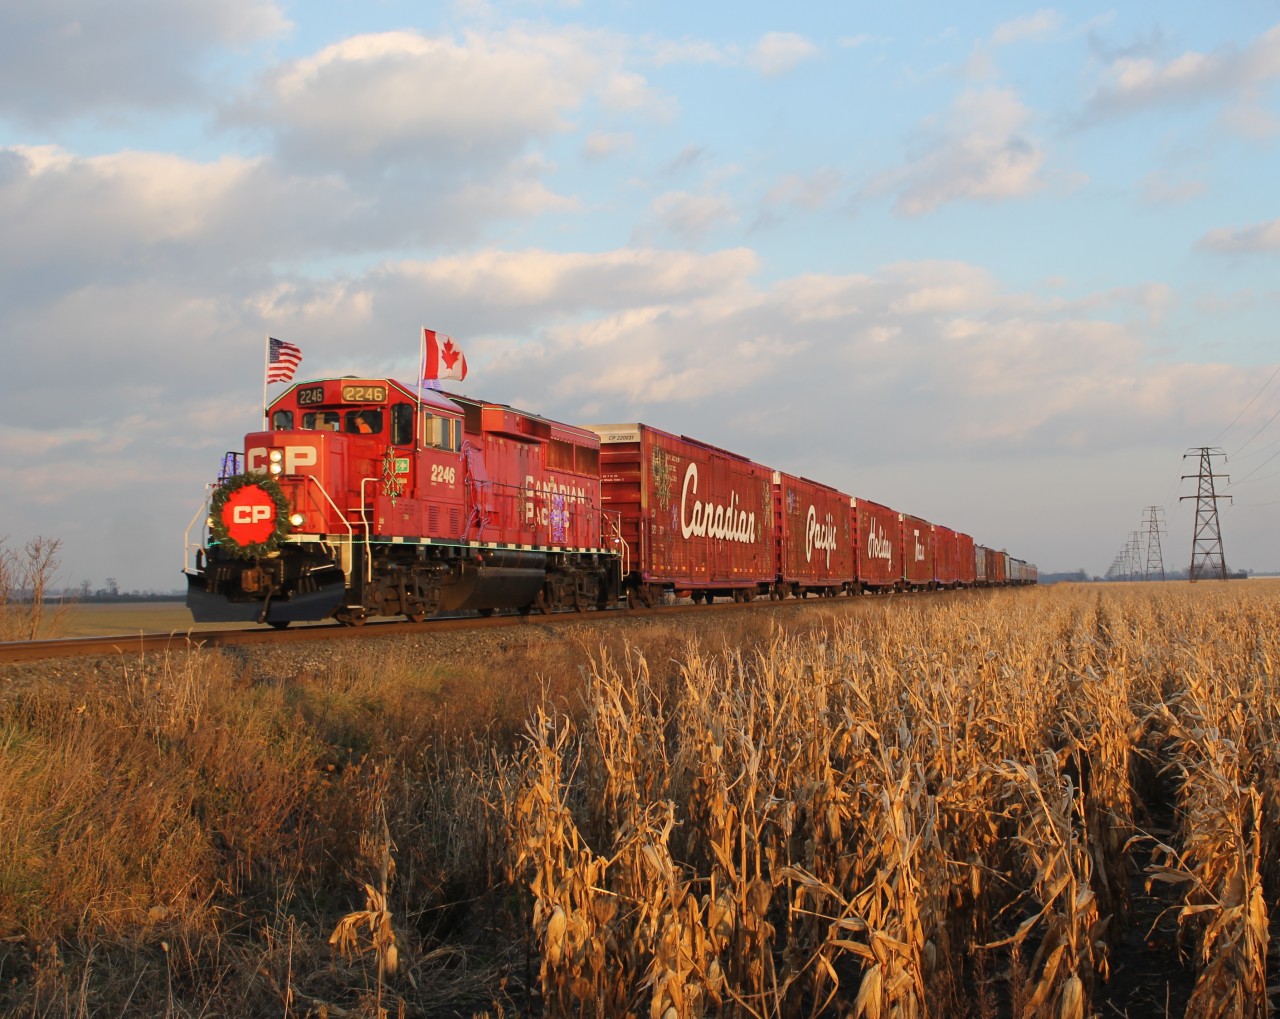 After having a meet in Tilbury with CP 140, the US Canadian Pacific Holiday Train dashes by a field on its' way to Windsor. This was taken at Gracey Side Road roughly halfway between Tilbury and Haycroft.